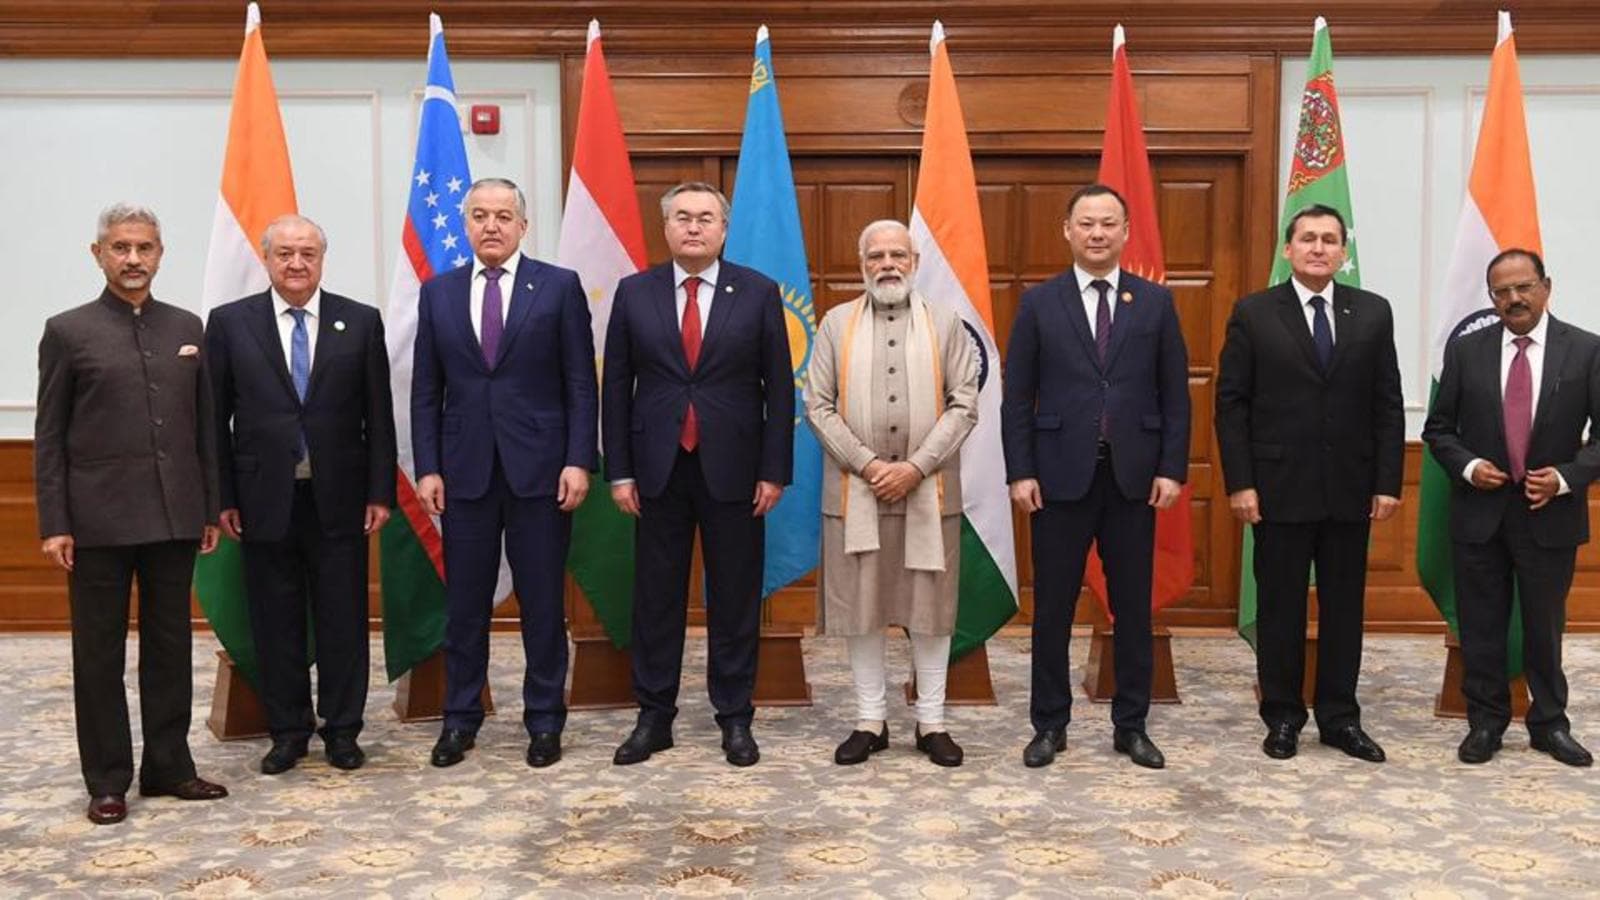 PM Modi underscores importance of ties with Central Asian nations in meeting with FMs | Latest News India